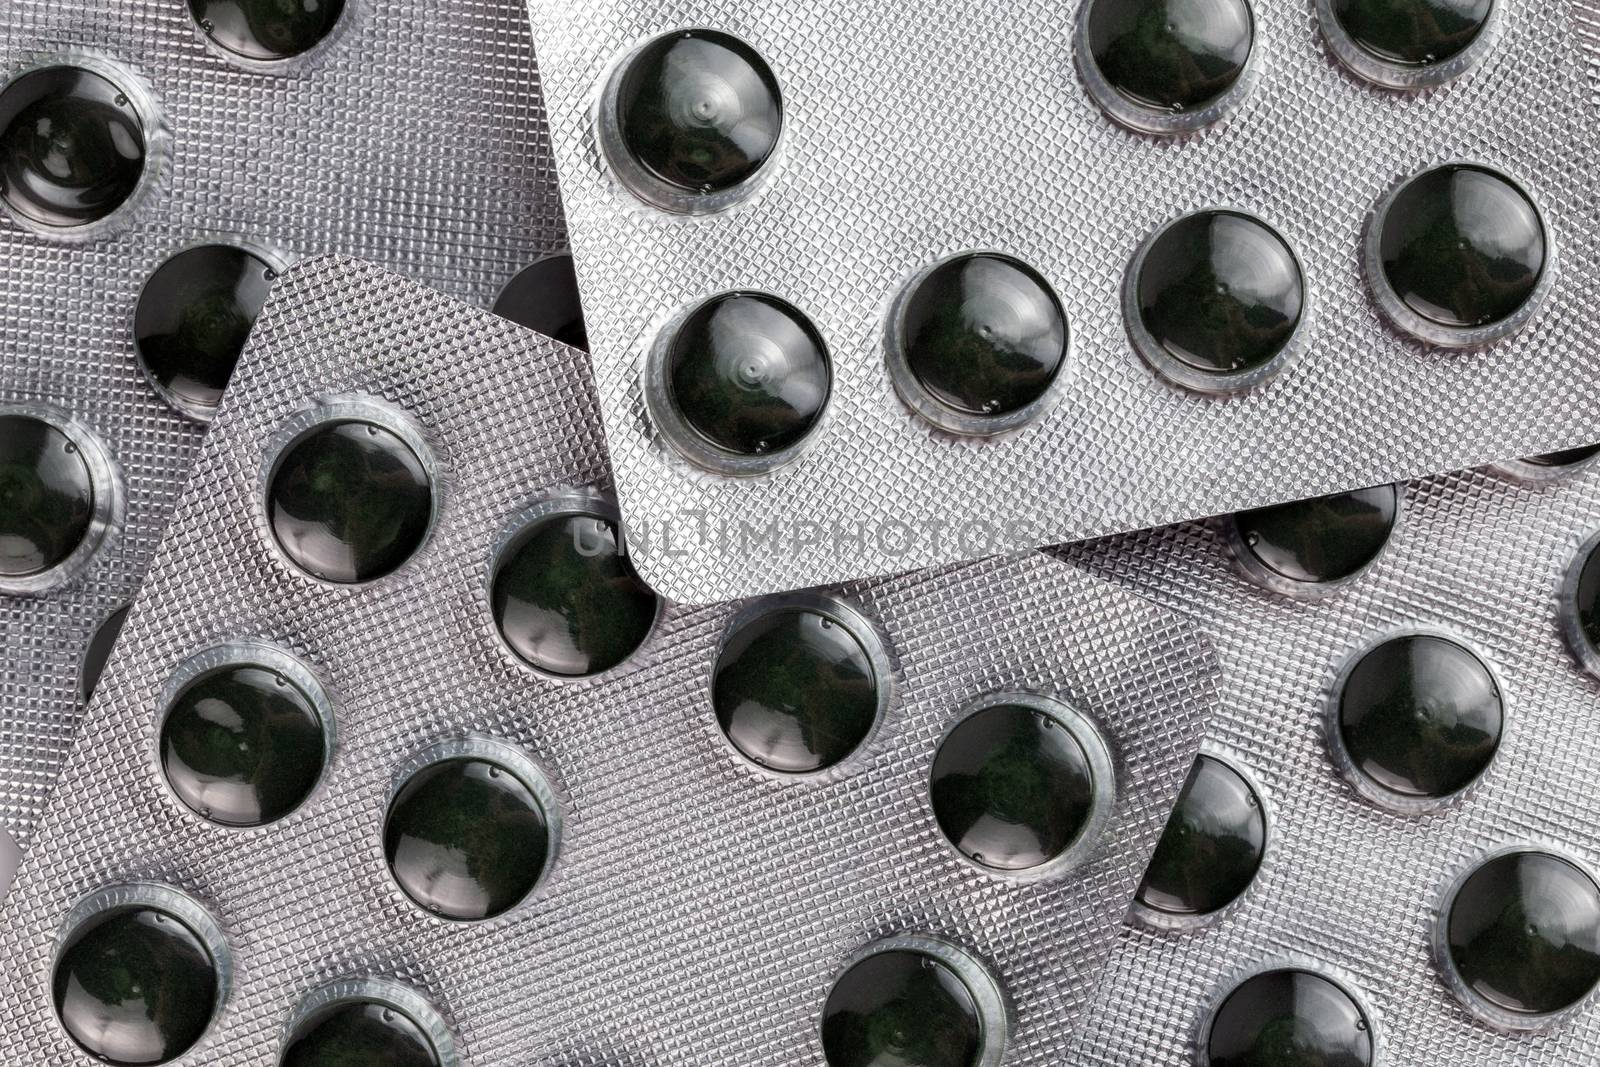 raw green compact spirulina powder pills in medical blister packs close-up with selective focus and background blur